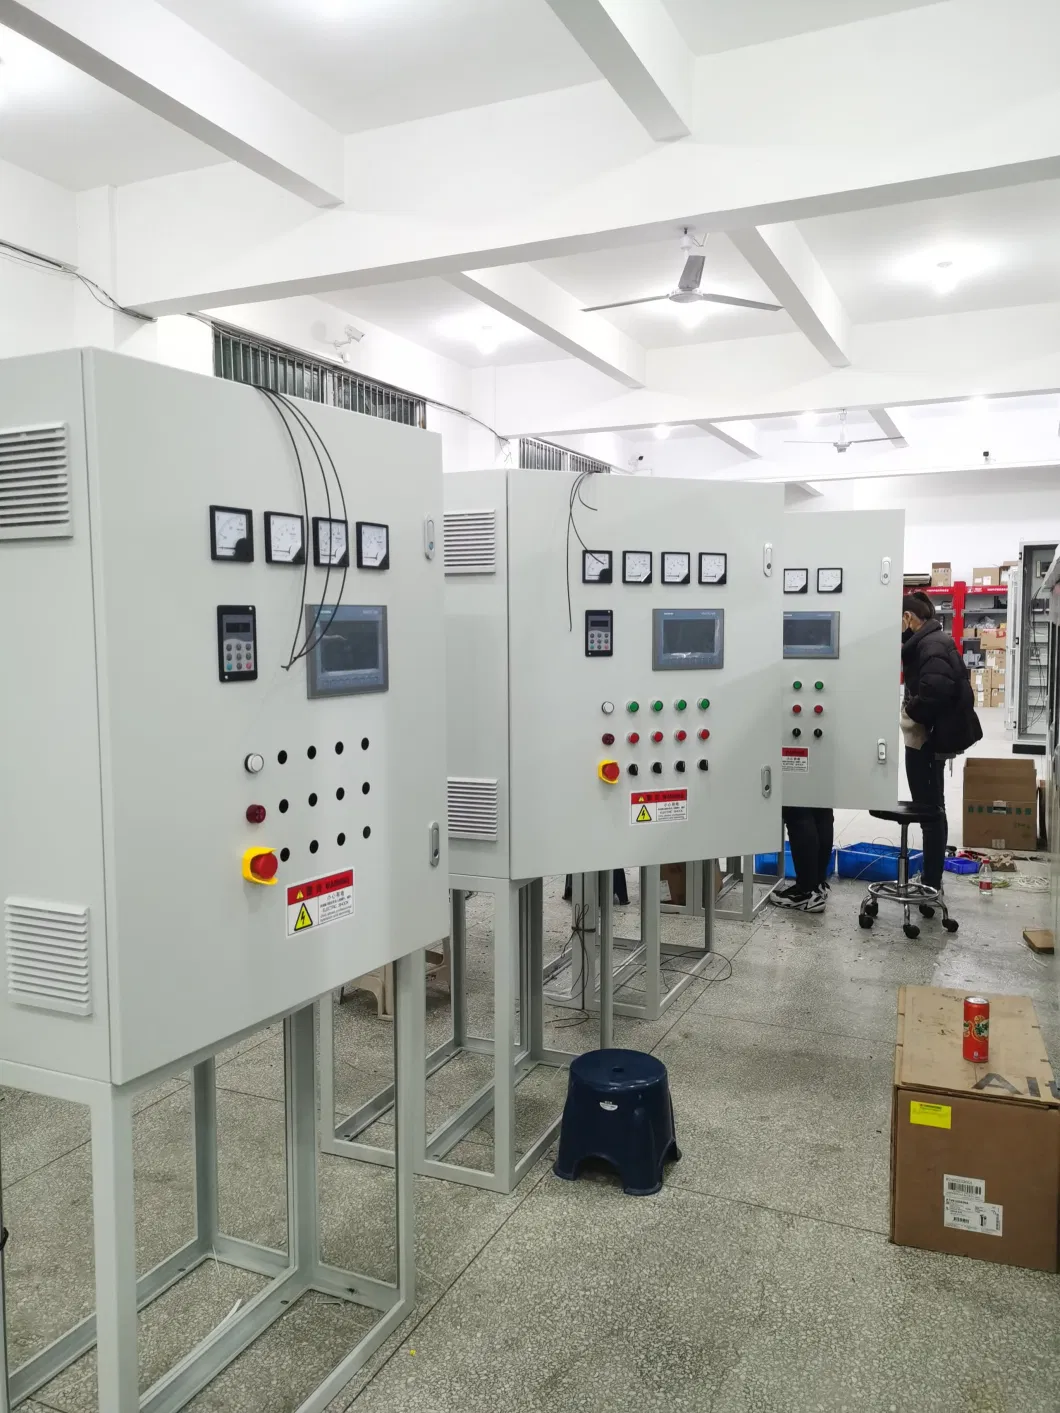 Q22 Outdoor Electrical Enclosure Cabinet Industrial Project Electric Power Control Cabinet